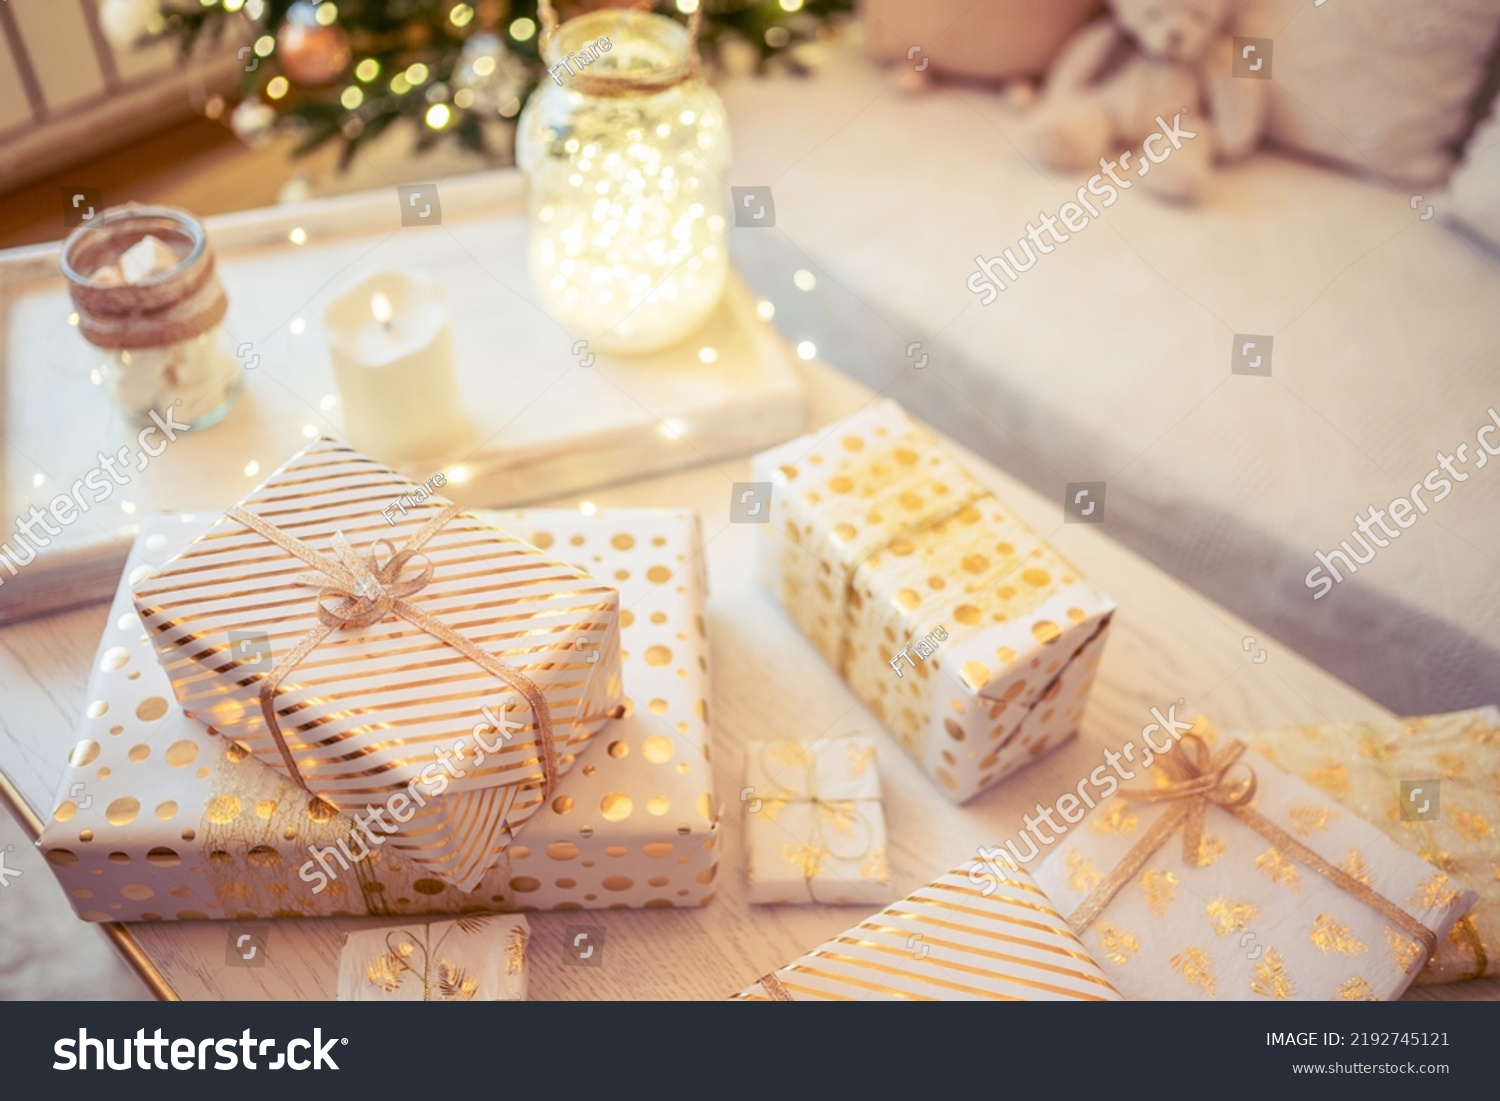 A lot of packing handmade gift boxes lying on the table near Christmas tree in the midst of golden lights, glowing garland, candle. Soft focus #2192745121